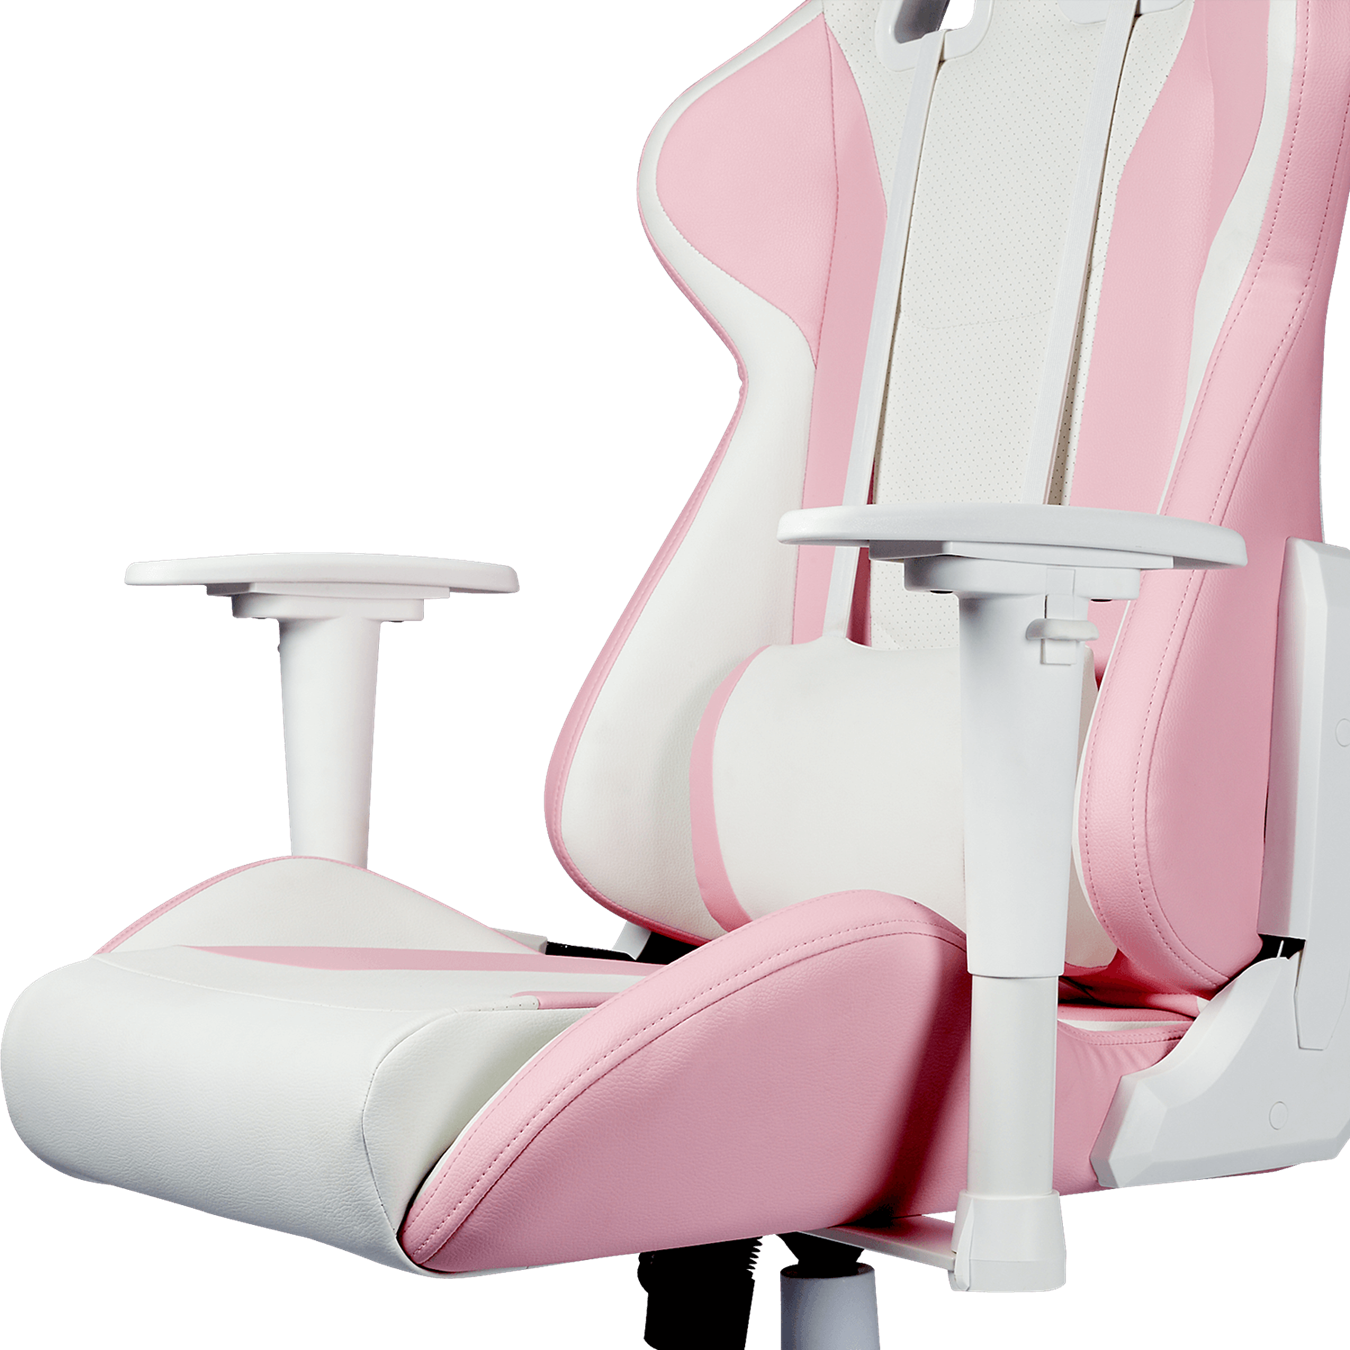 Caliber R1S Rose White Edition Gaming Chair - The perfect combo to help alleviate neck strain and support your lower back.